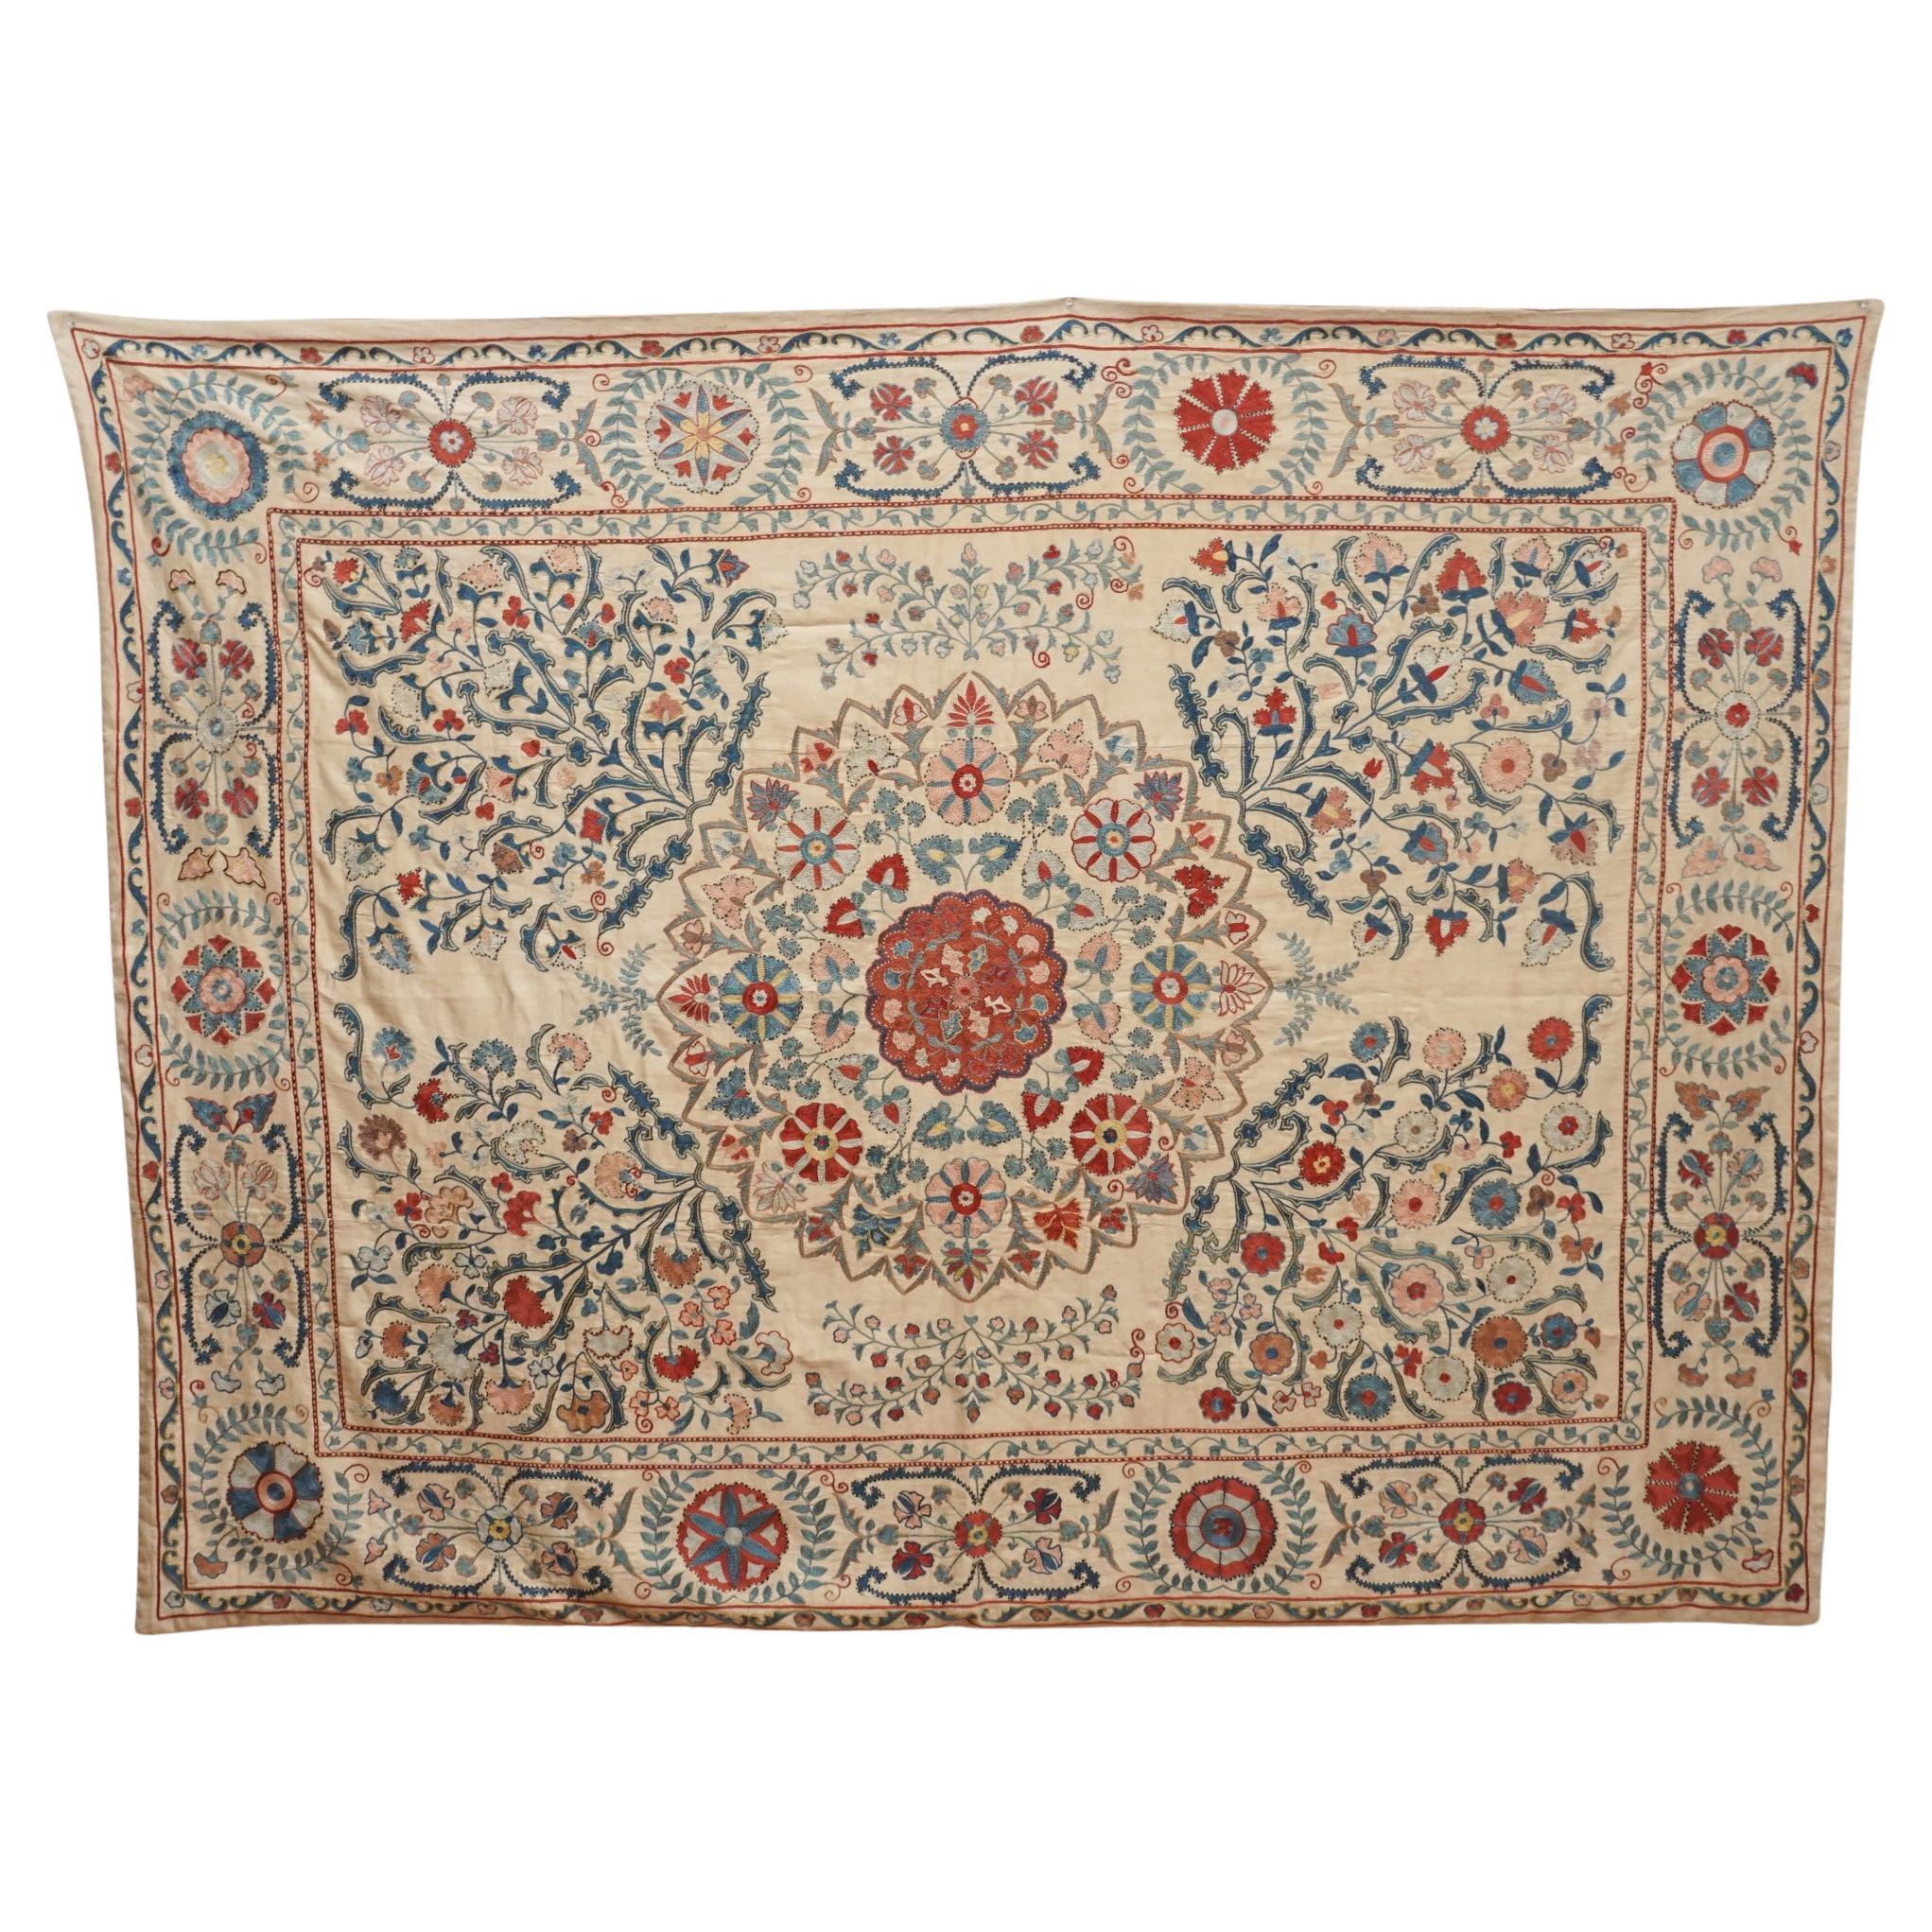 Antique Suzani Embroidered Textile For Sale